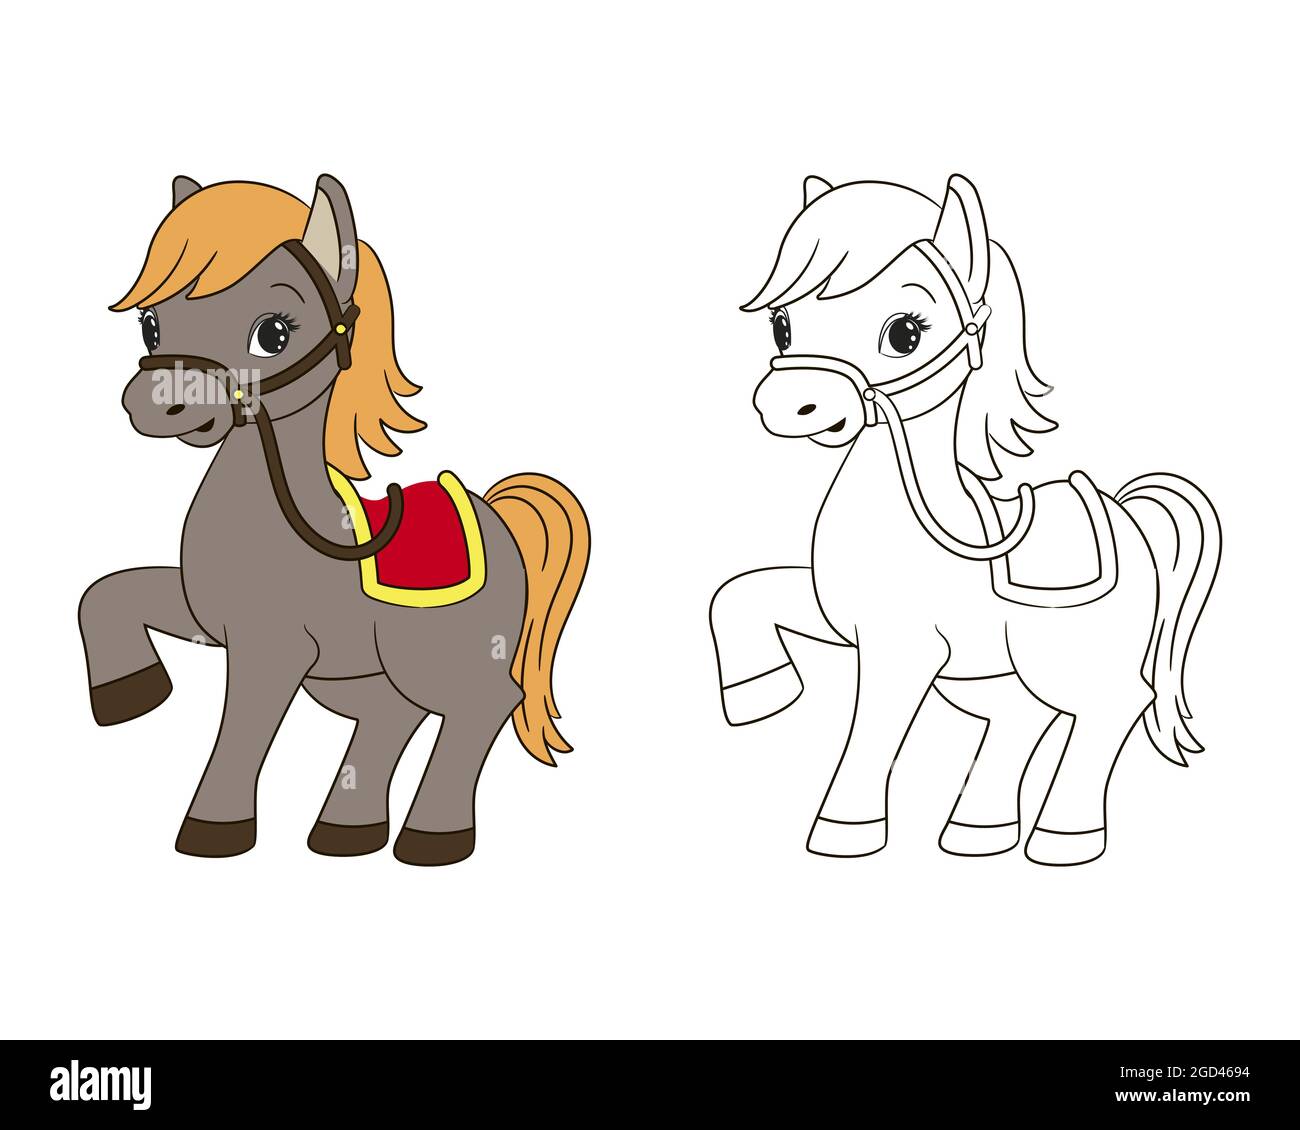 coloring book for kids, little funny horse with red saddle and yellow mane, vector , cartoon, line art Stock Vector